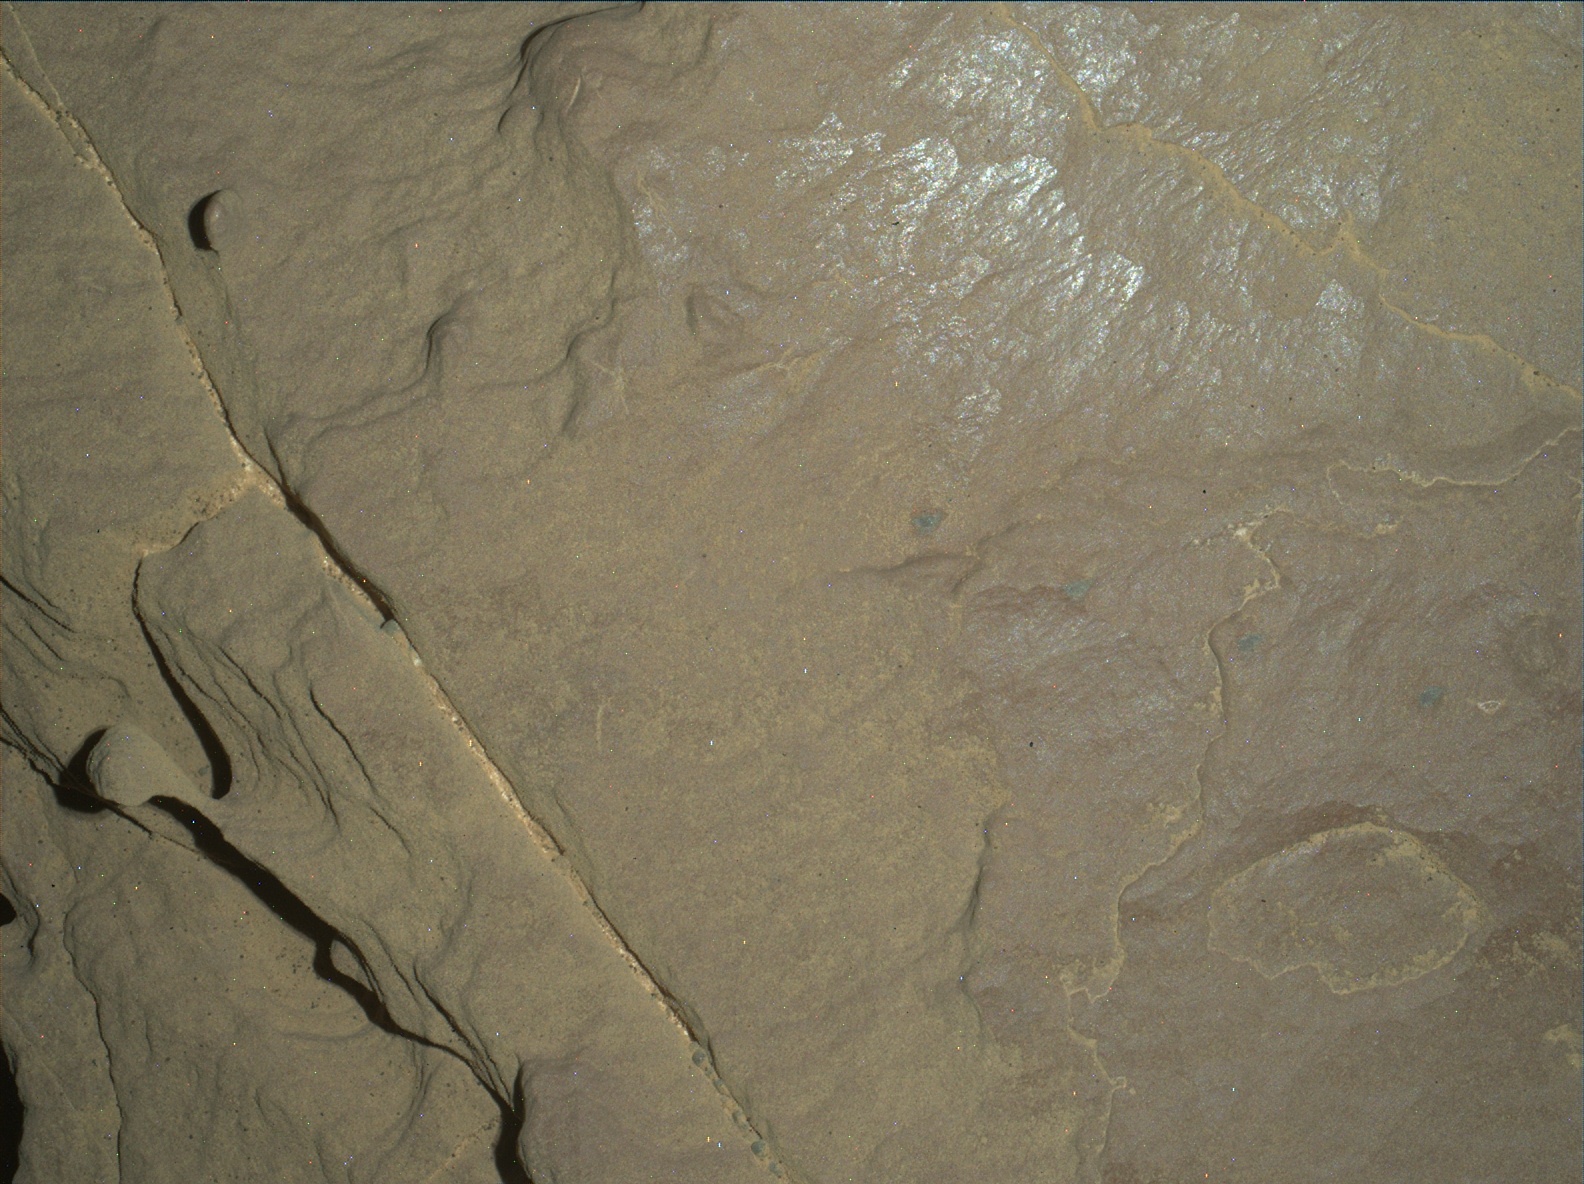 Nasa's Mars rover Curiosity acquired this image using its Mars Hand Lens Imager (MAHLI) on Sol 2003